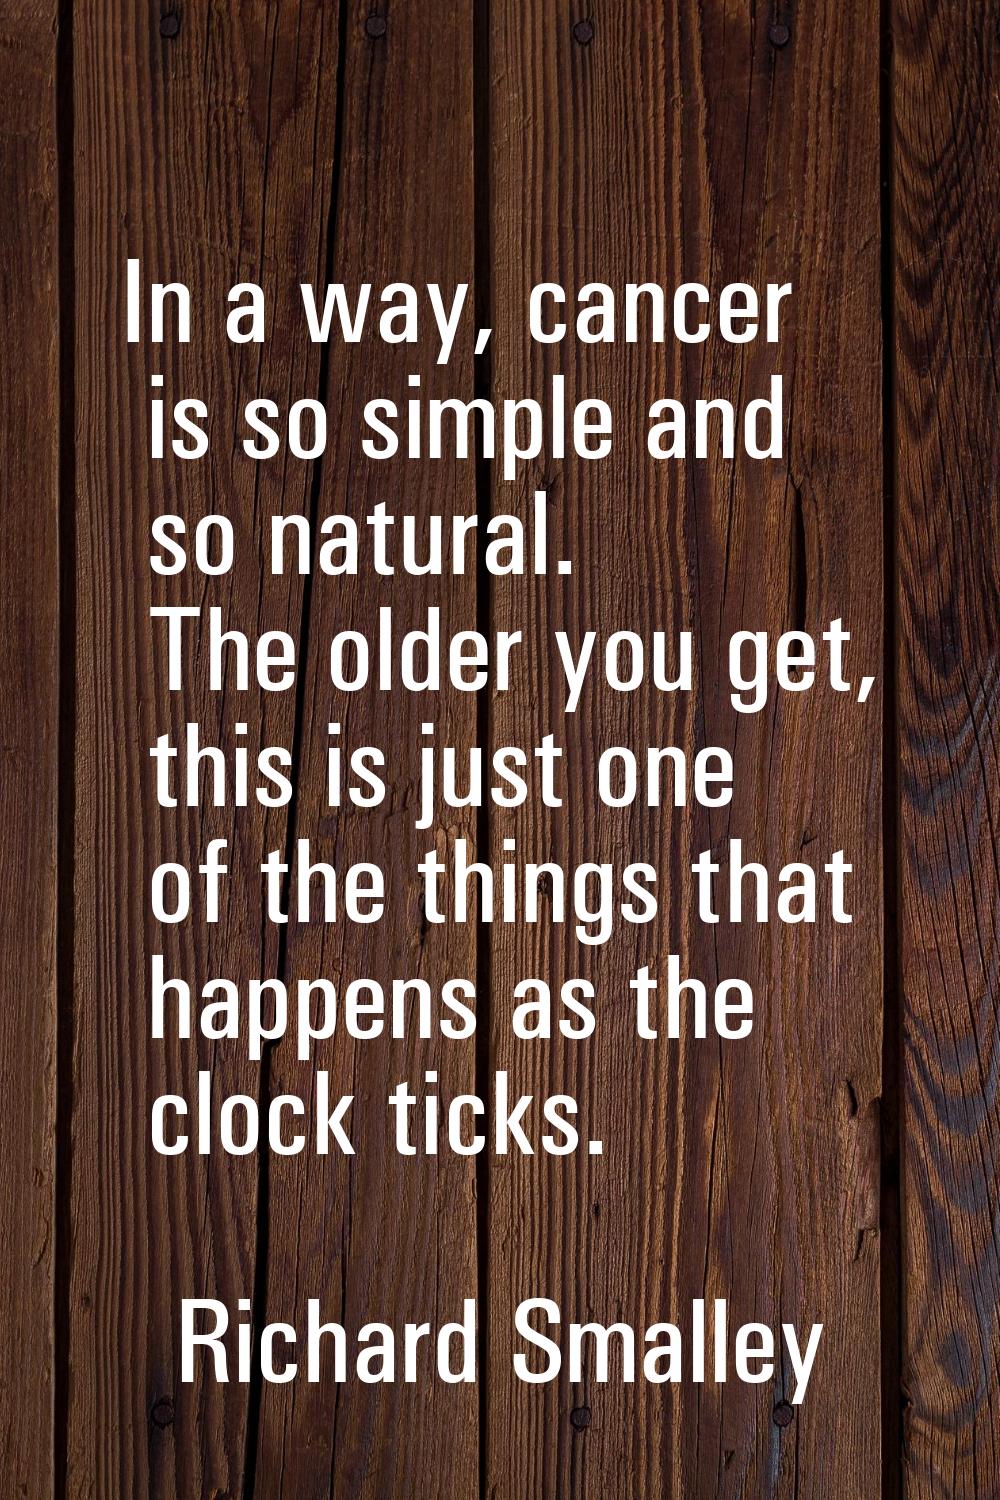 In a way, cancer is so simple and so natural. The older you get, this is just one of the things tha